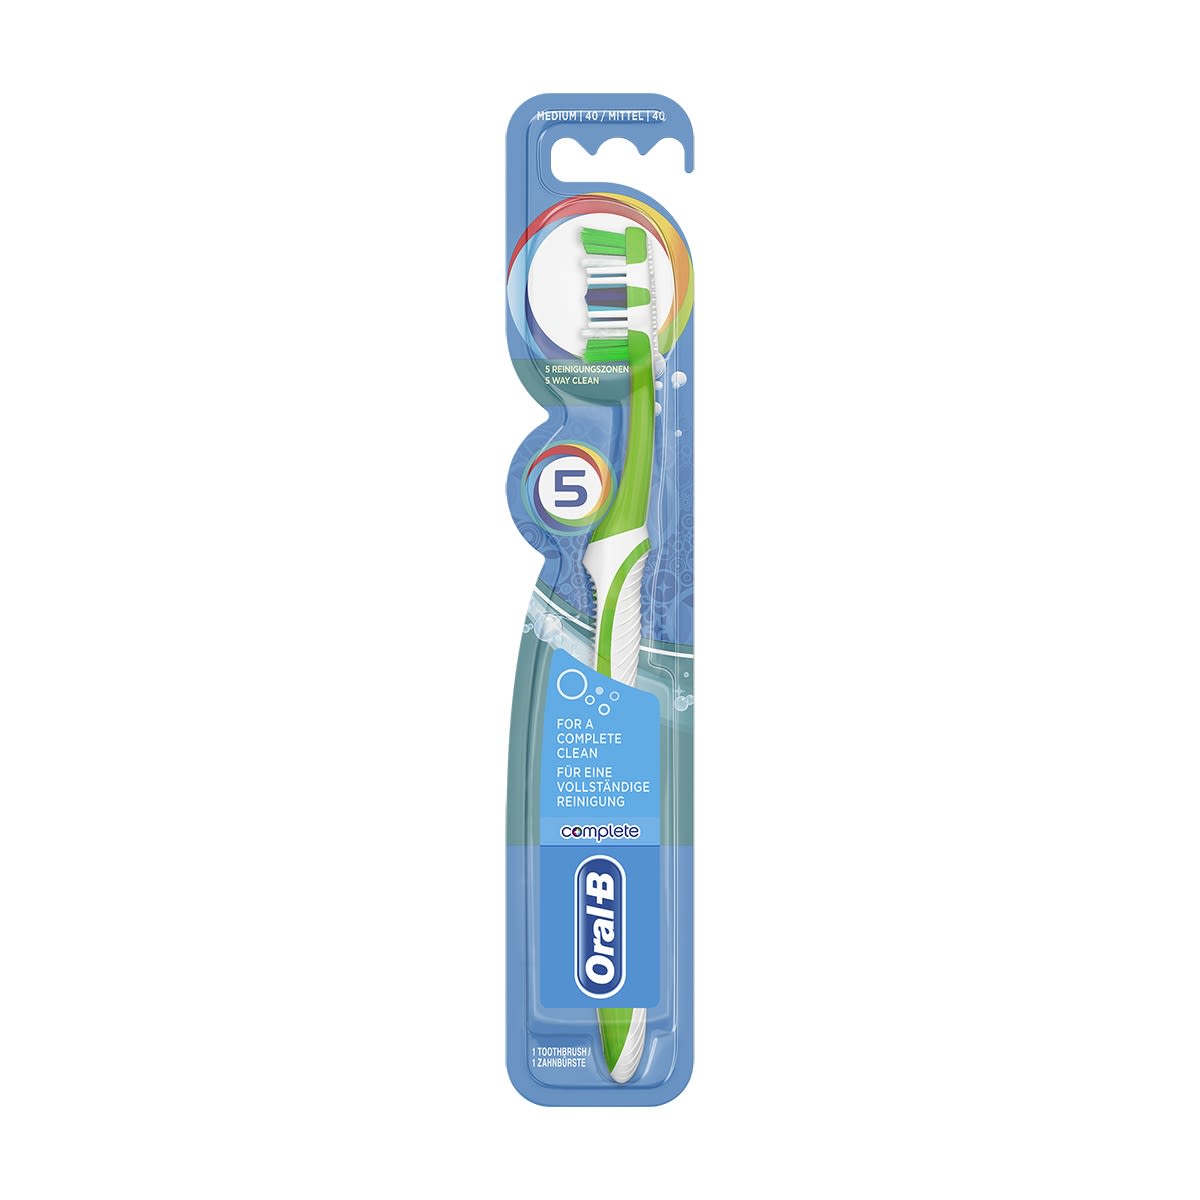 Oral-B Complete undefined